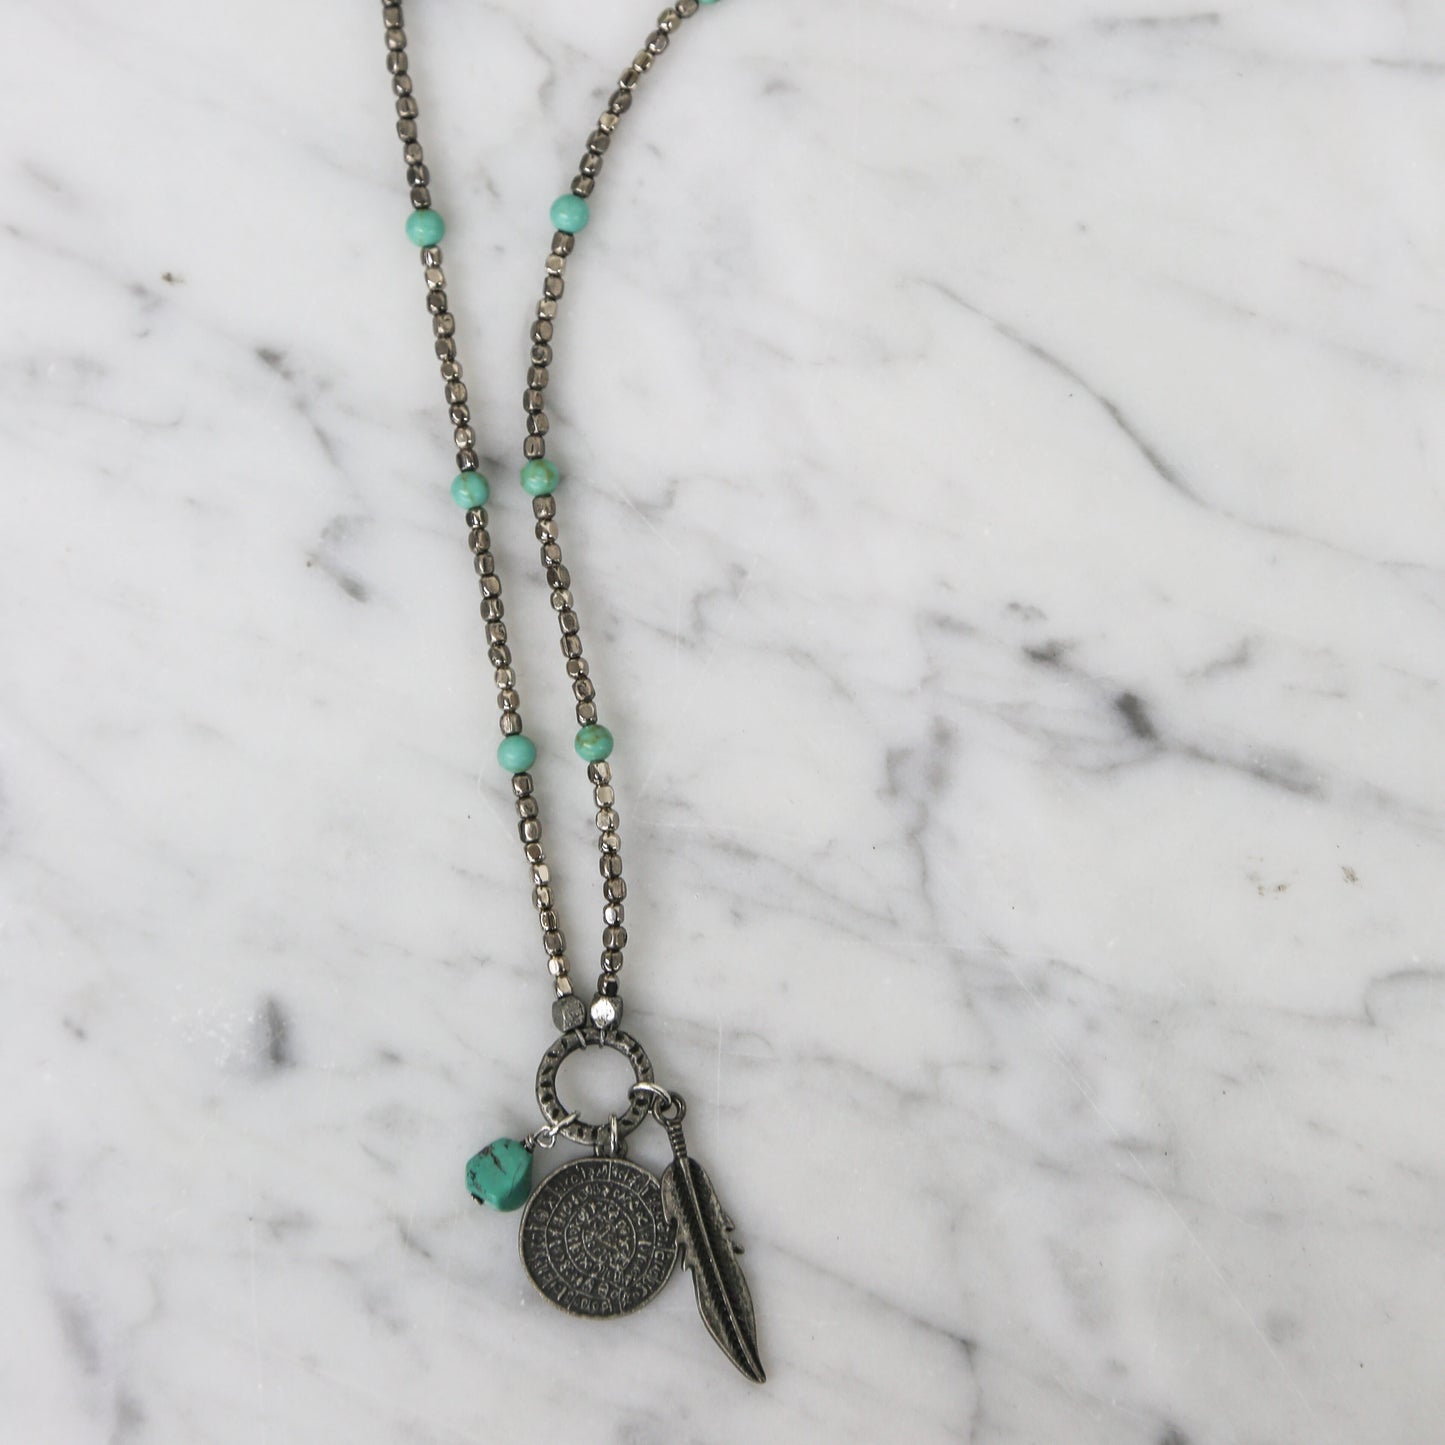 Silver Beaded Necklace with Turquoise Accents